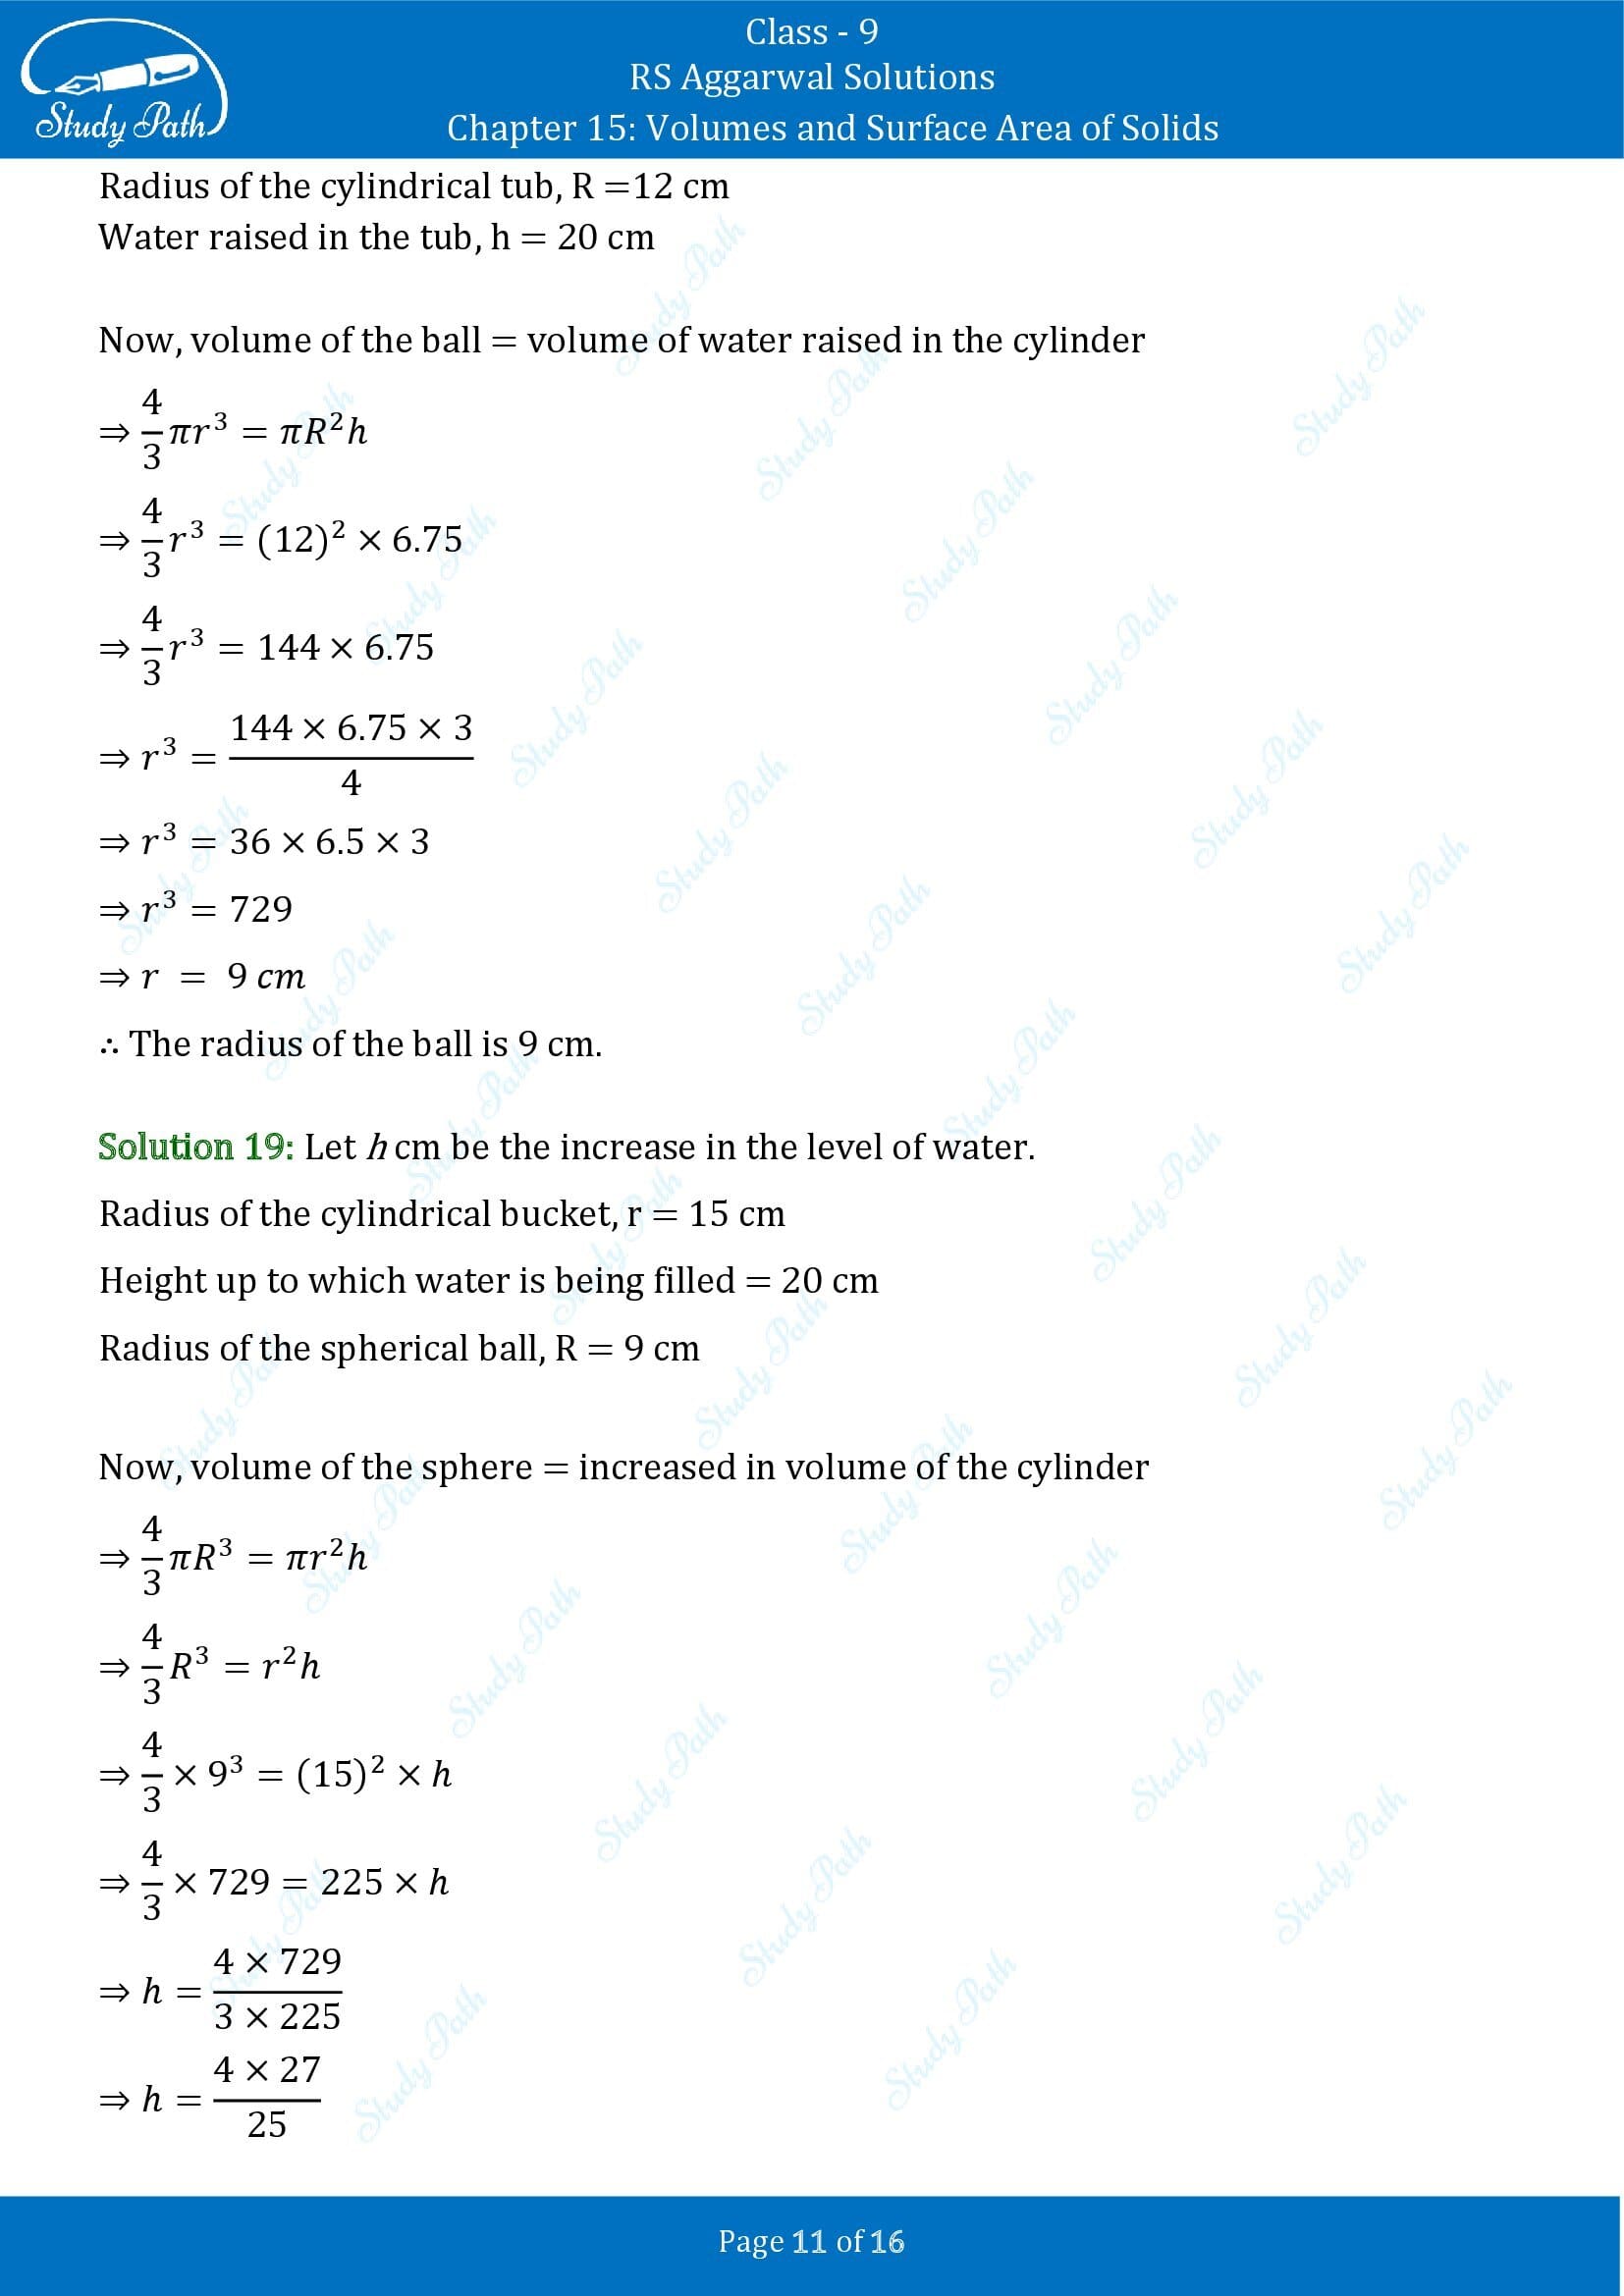 RS Aggarwal Solutions Class 9 Chapter 15 Volumes and Surface Area of Solids Exercise 15D 00011